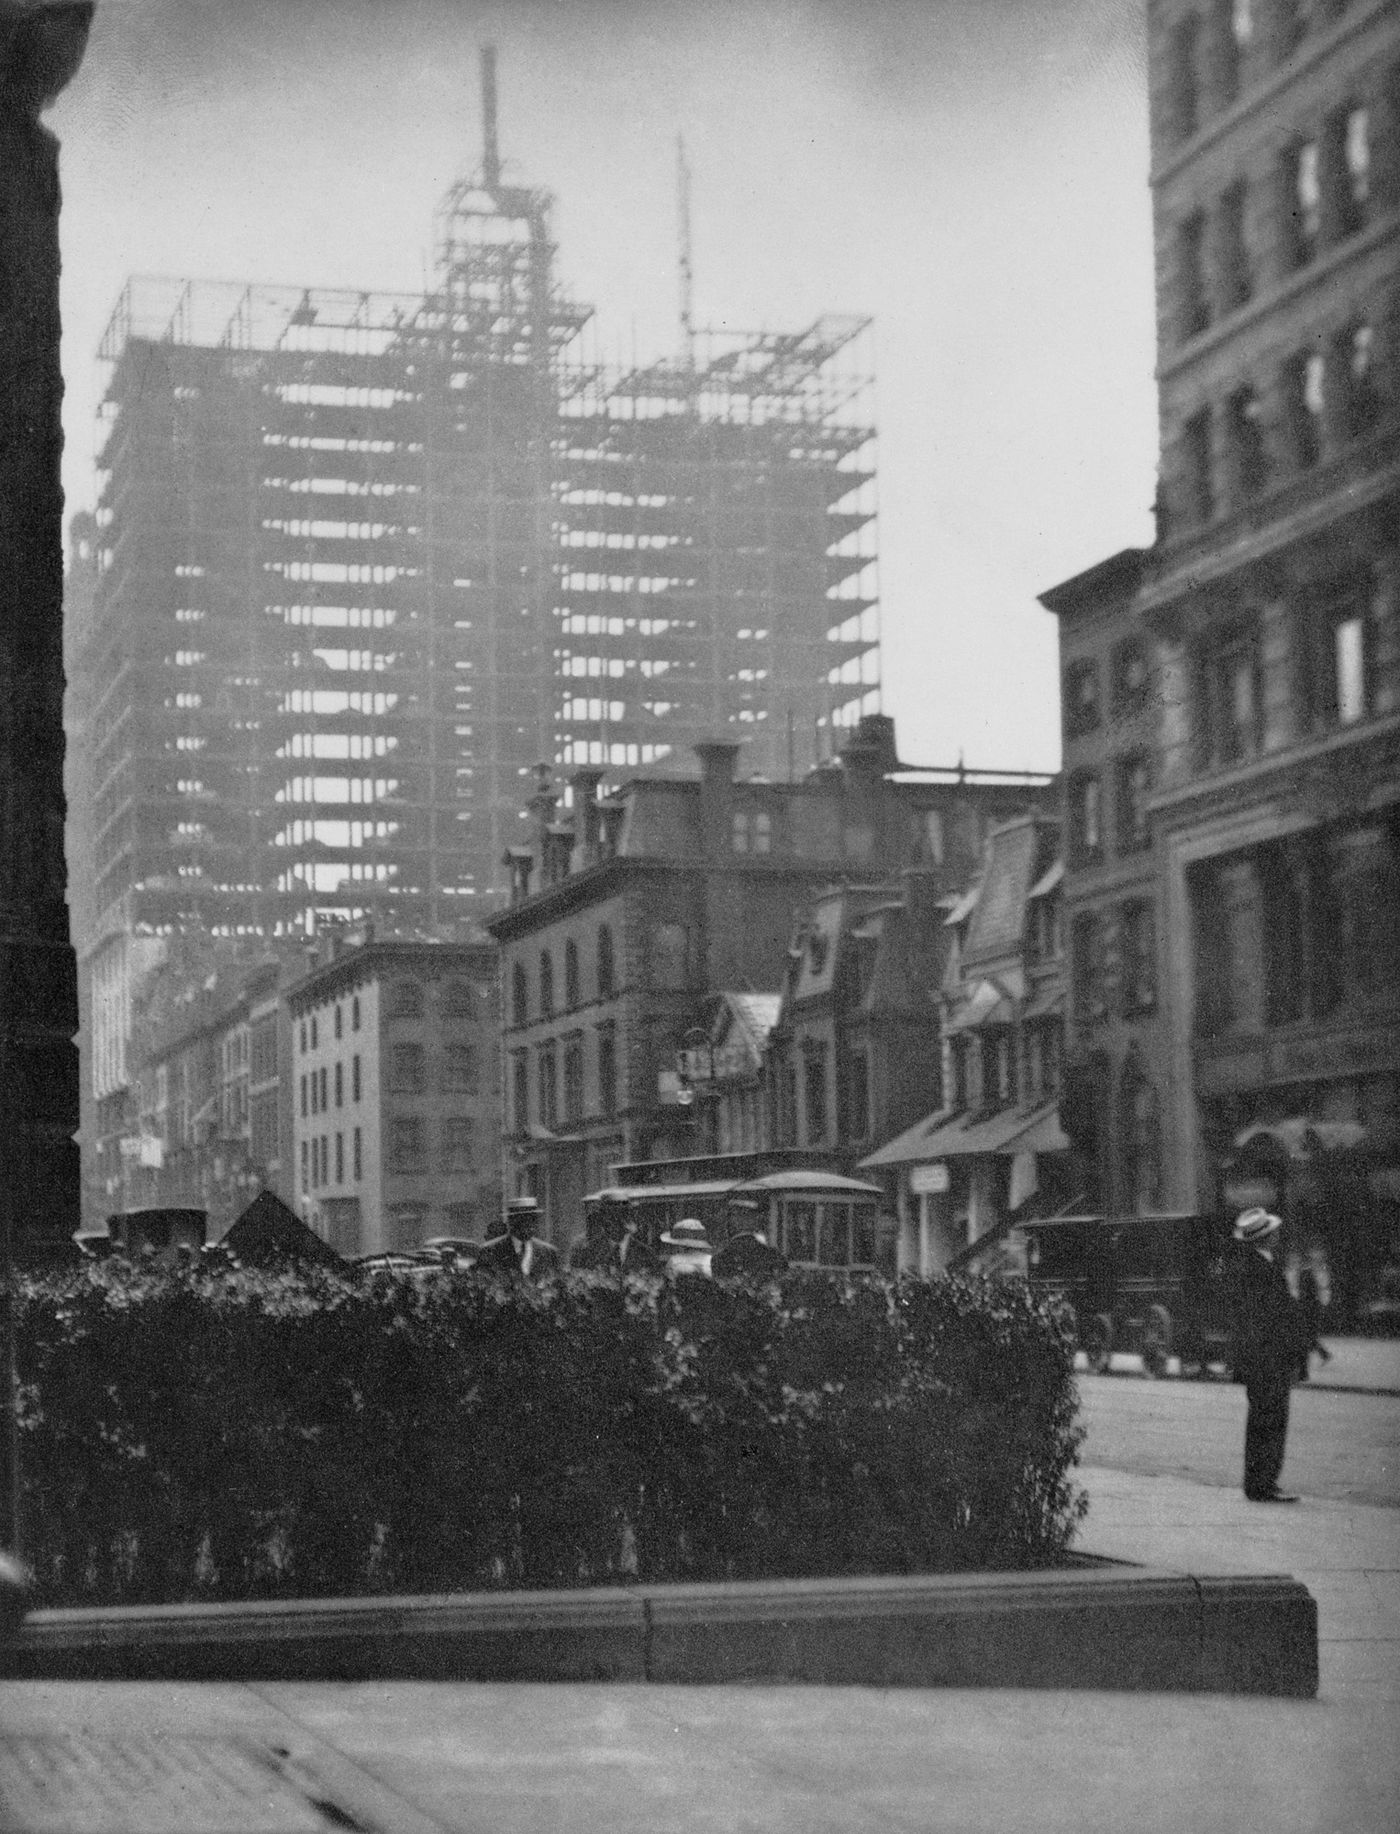 View of man on street with older buildings, new skyscraper under construction behind, New York City, New York